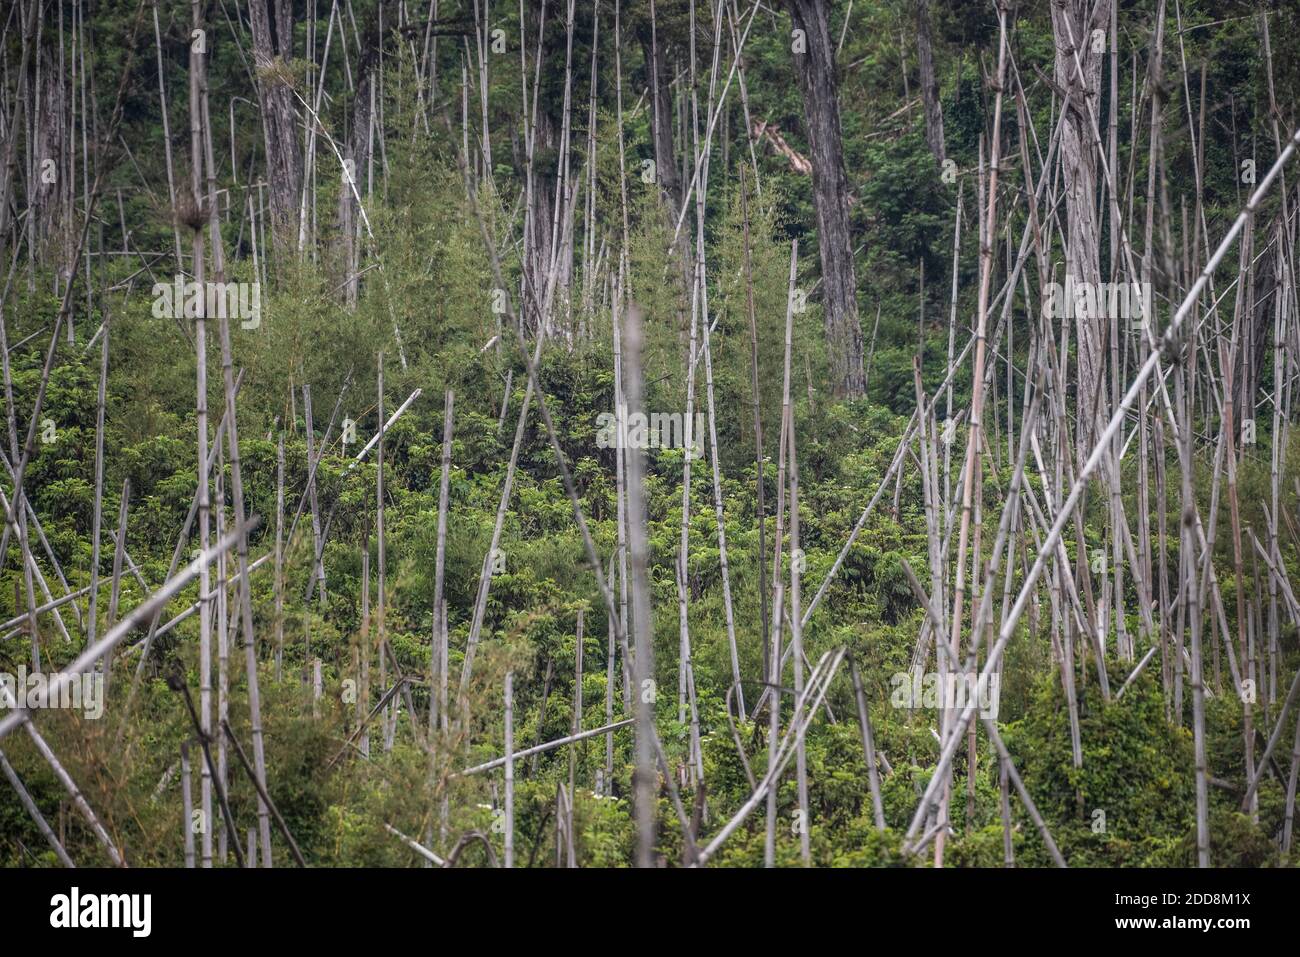 Bamboo Forest in Aberdare National Park, Kenya Stock Photo